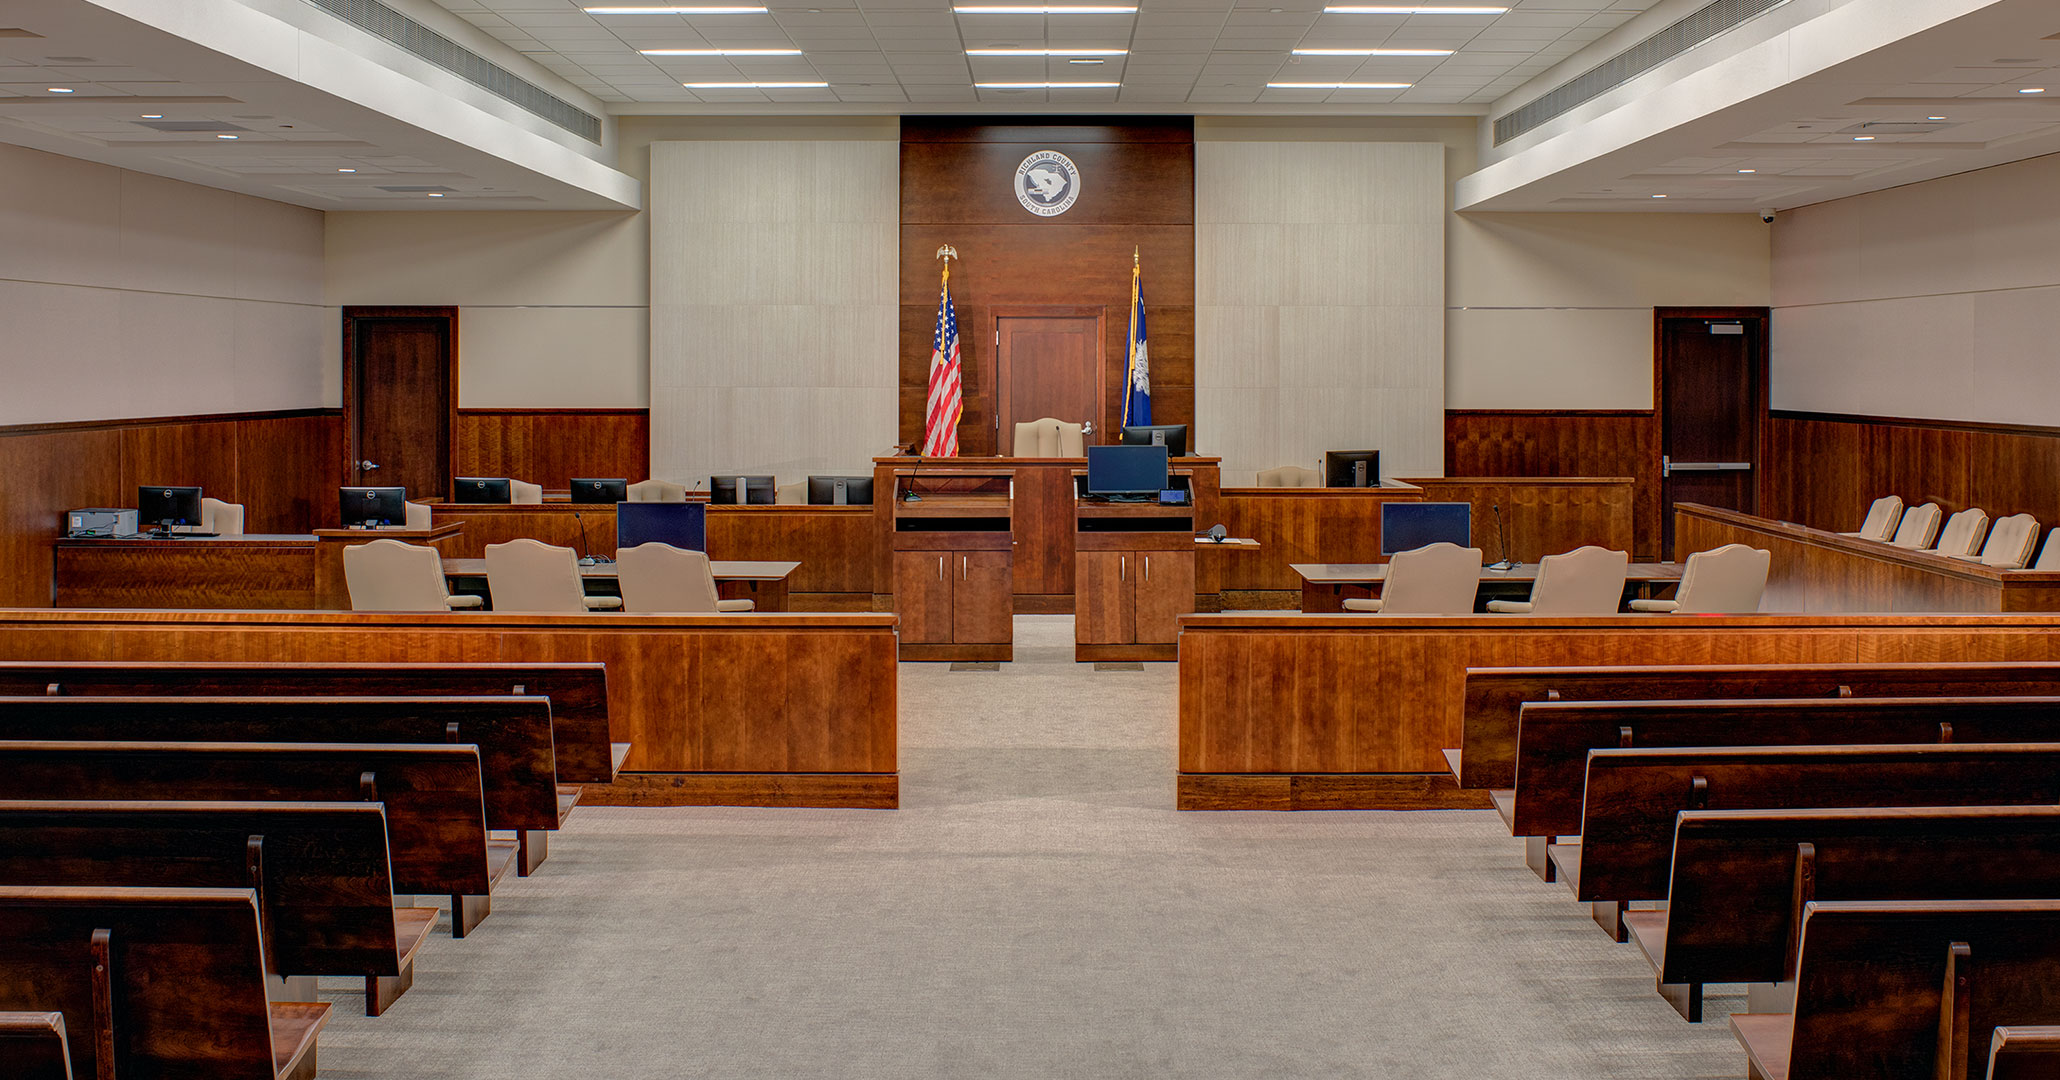 Richland County hired Columbia, SC architects Boudreaux to program the layout Decker Courthouse.